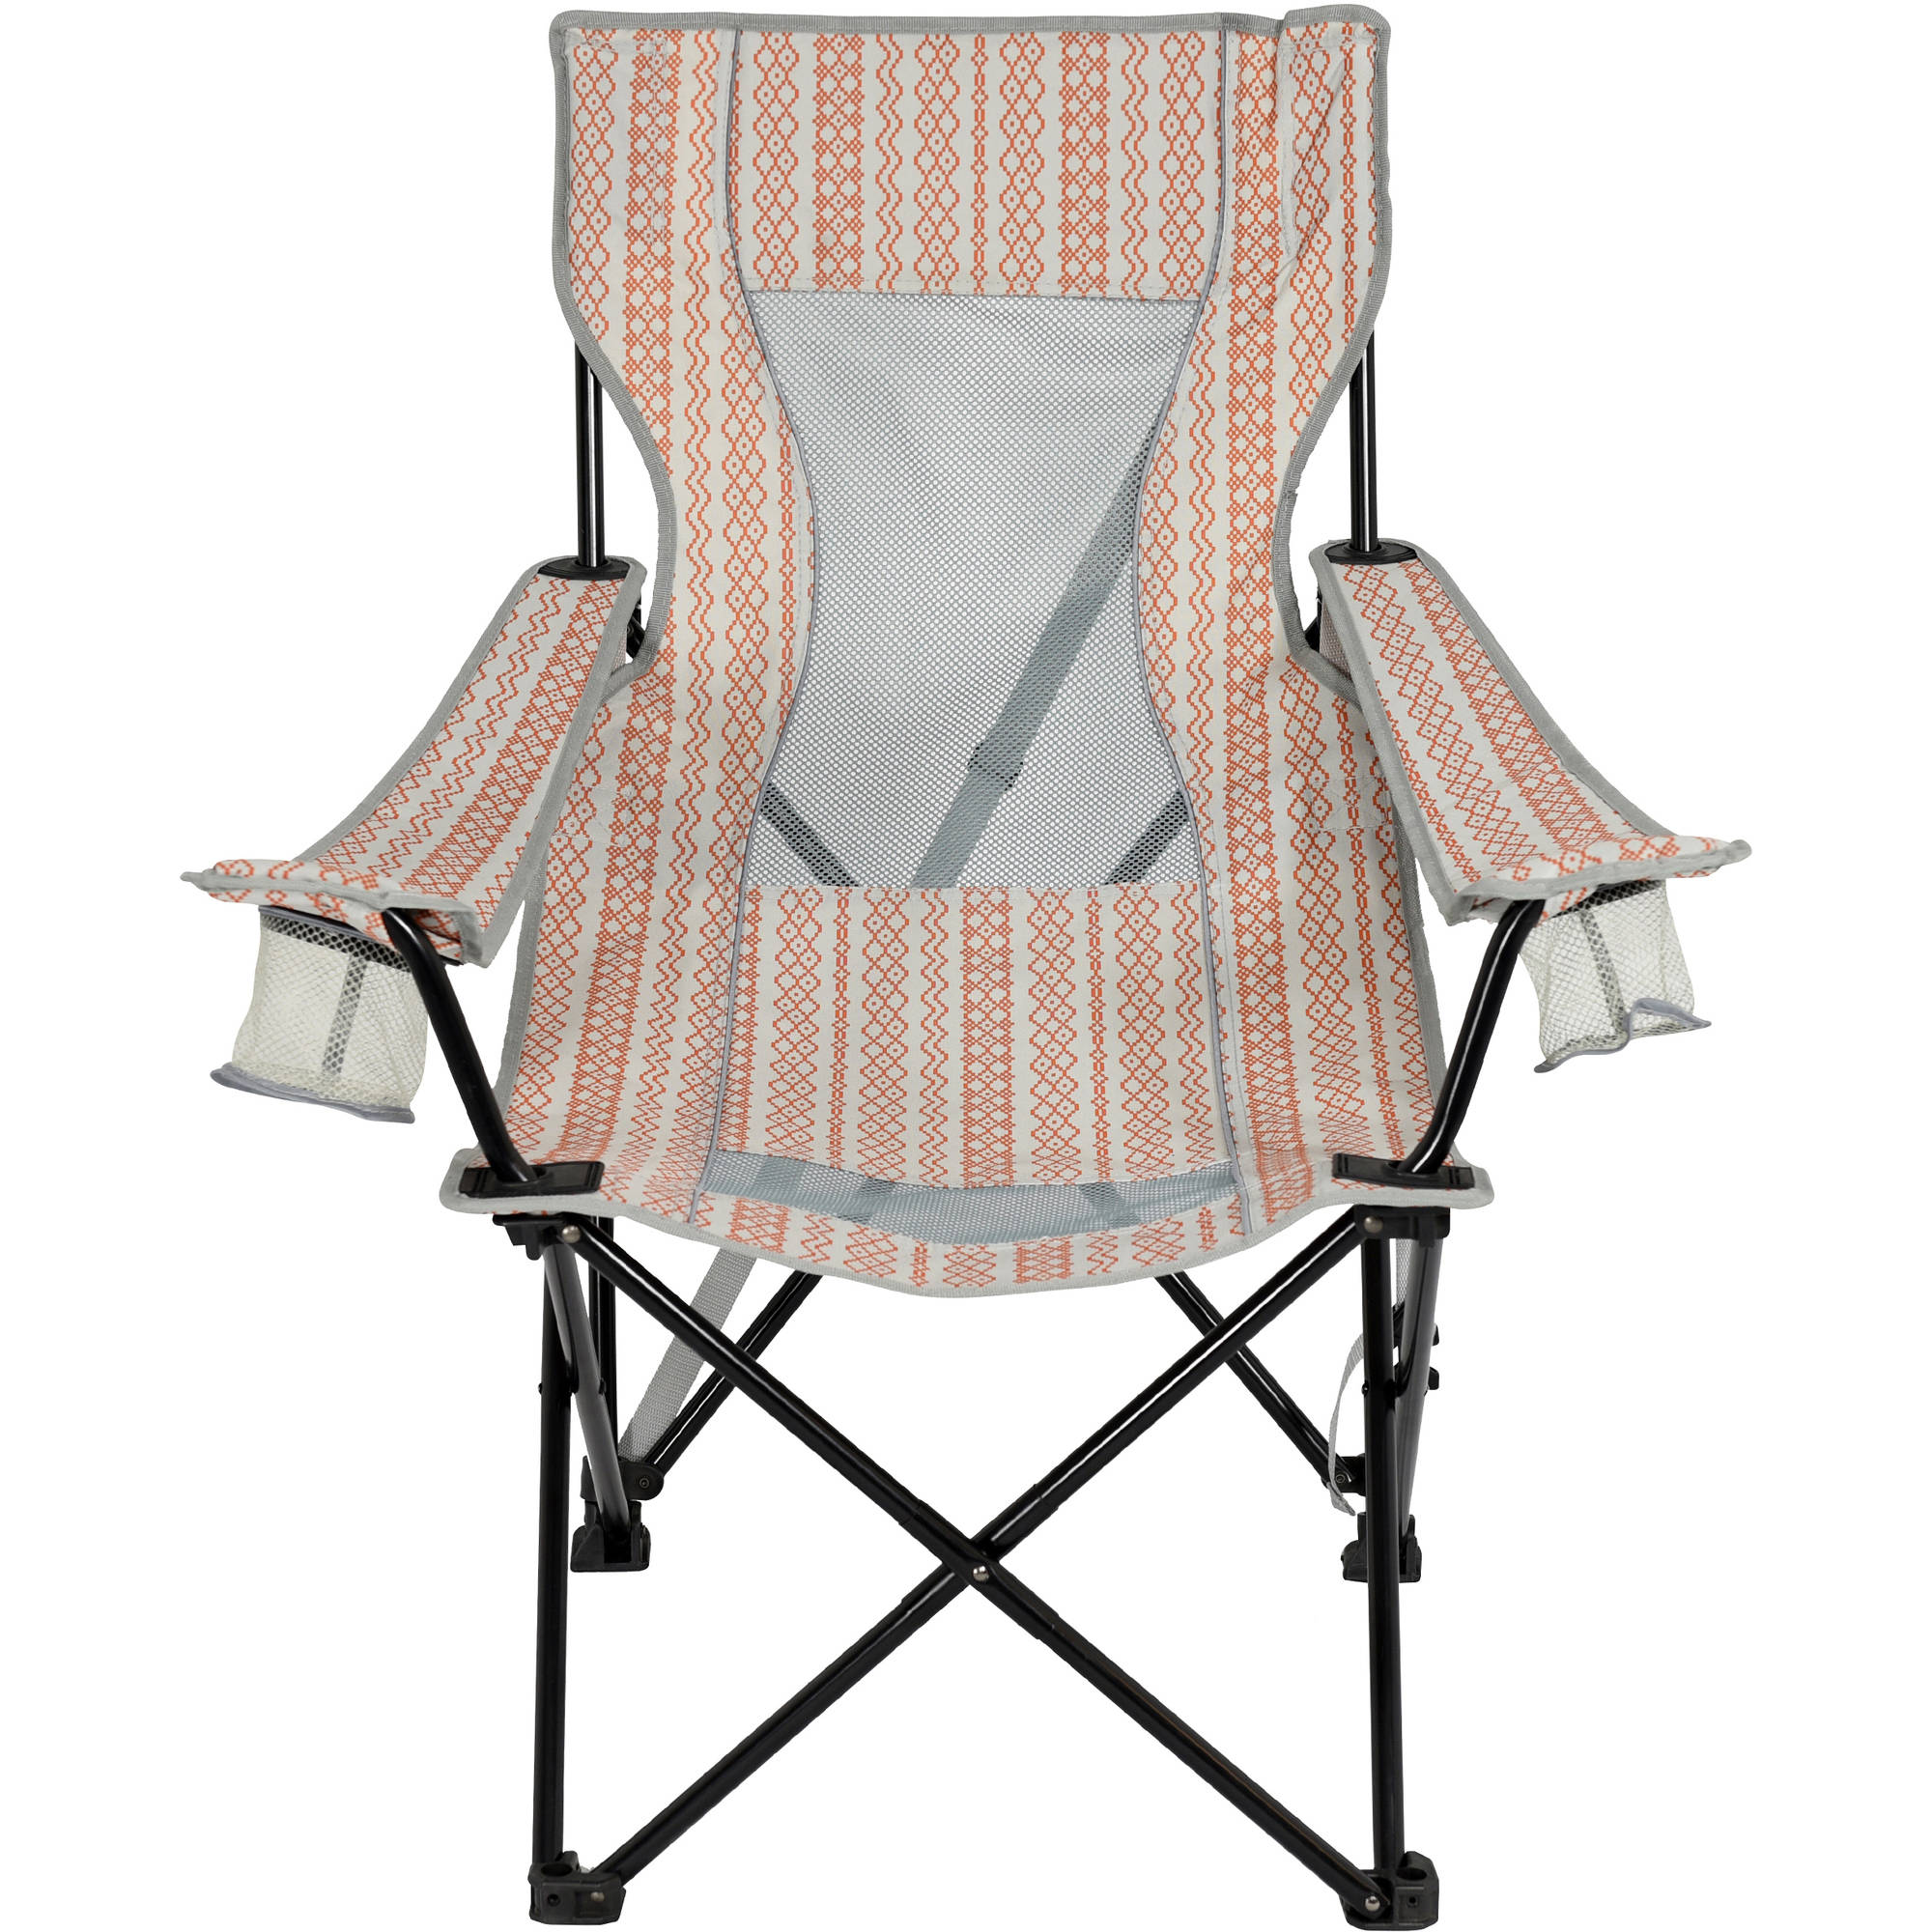 Oversized Mesh Lounge Chair - image 2 of 8